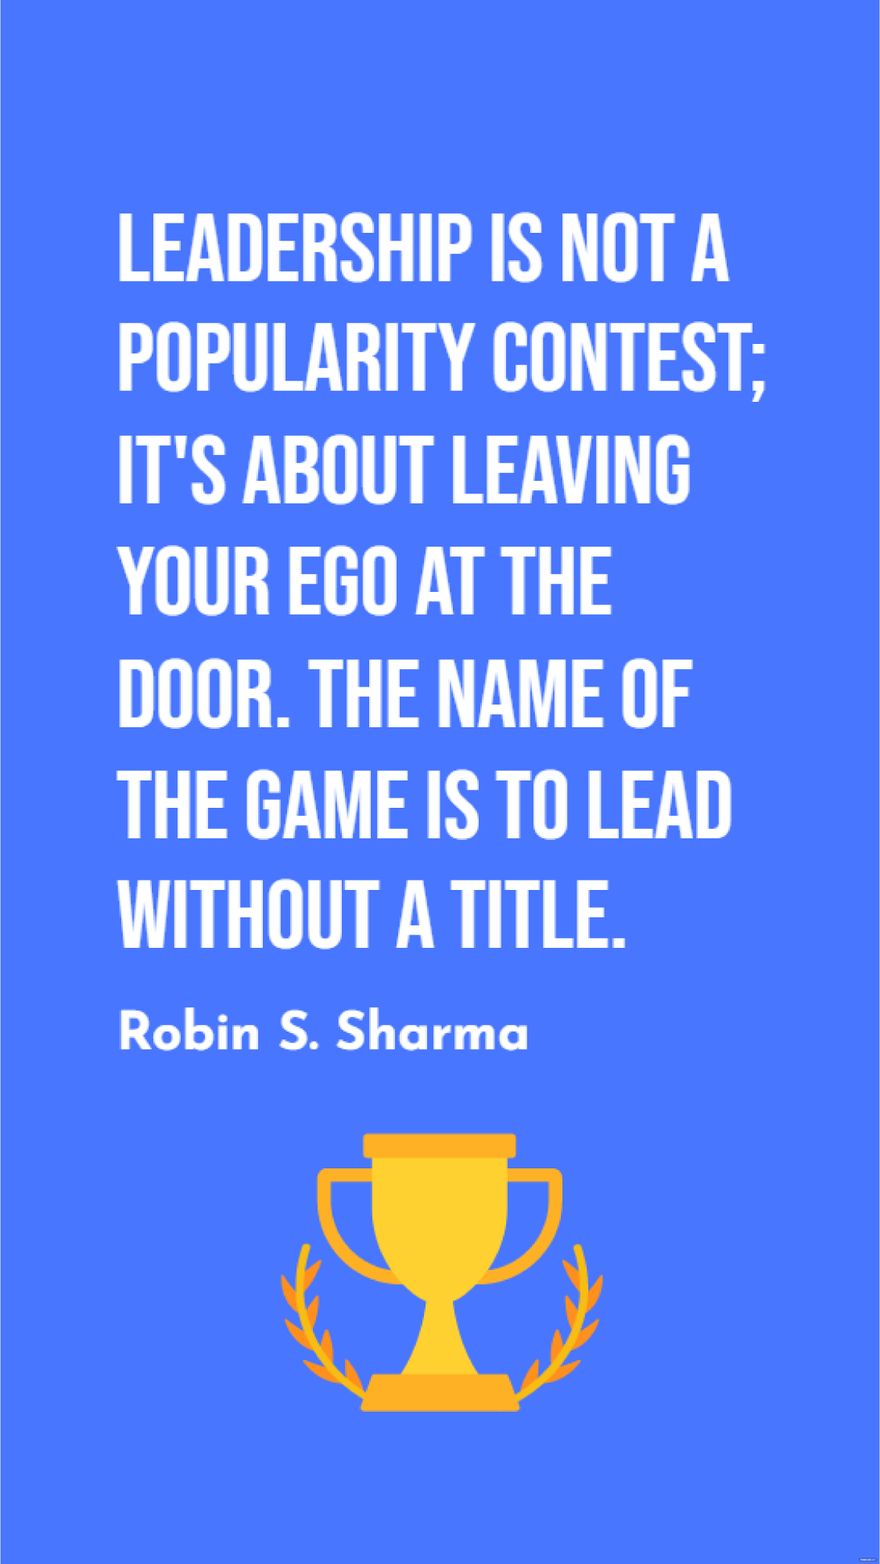 Robin S. Sharma - Leadership is not a popularity contest; it's about leaving your ego at the door. The name of the game is to lead without a title.